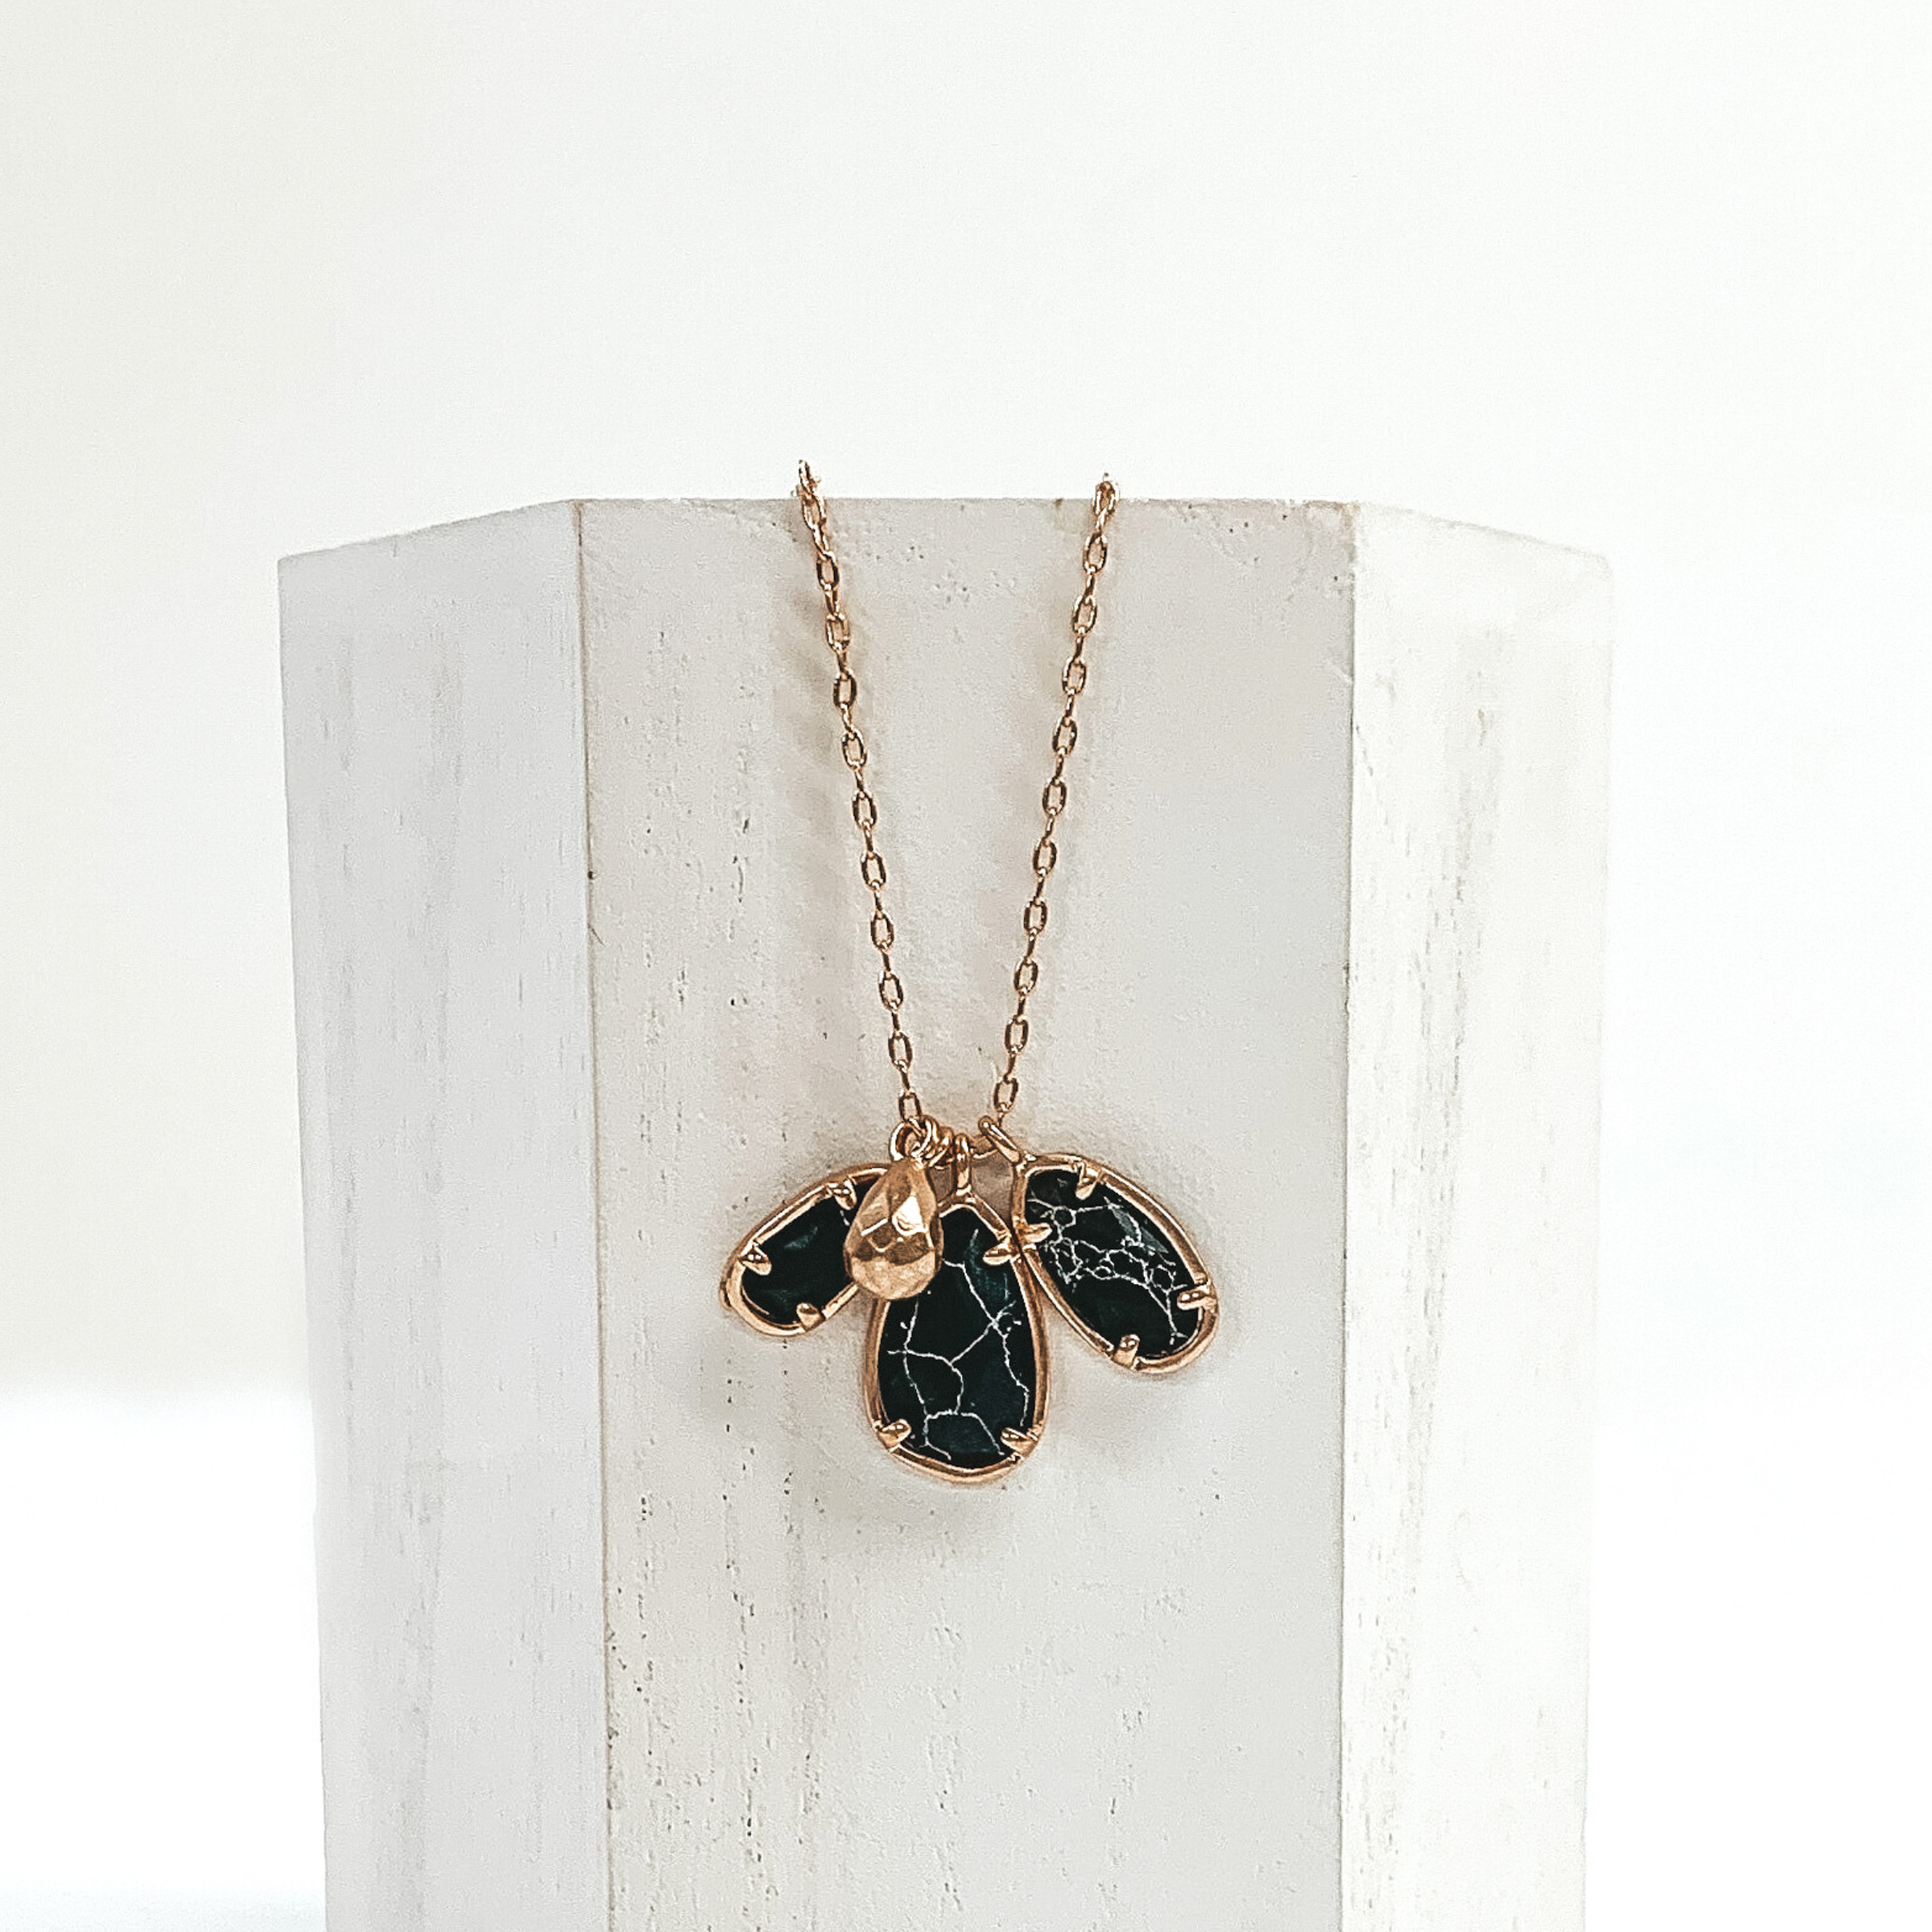 Small gold chain with three black marbled teardrop stone pendants outlined in gold. It also has a tiny gold teardrop pendant. This necklace is pictured laying a white piece of wood on a white background.